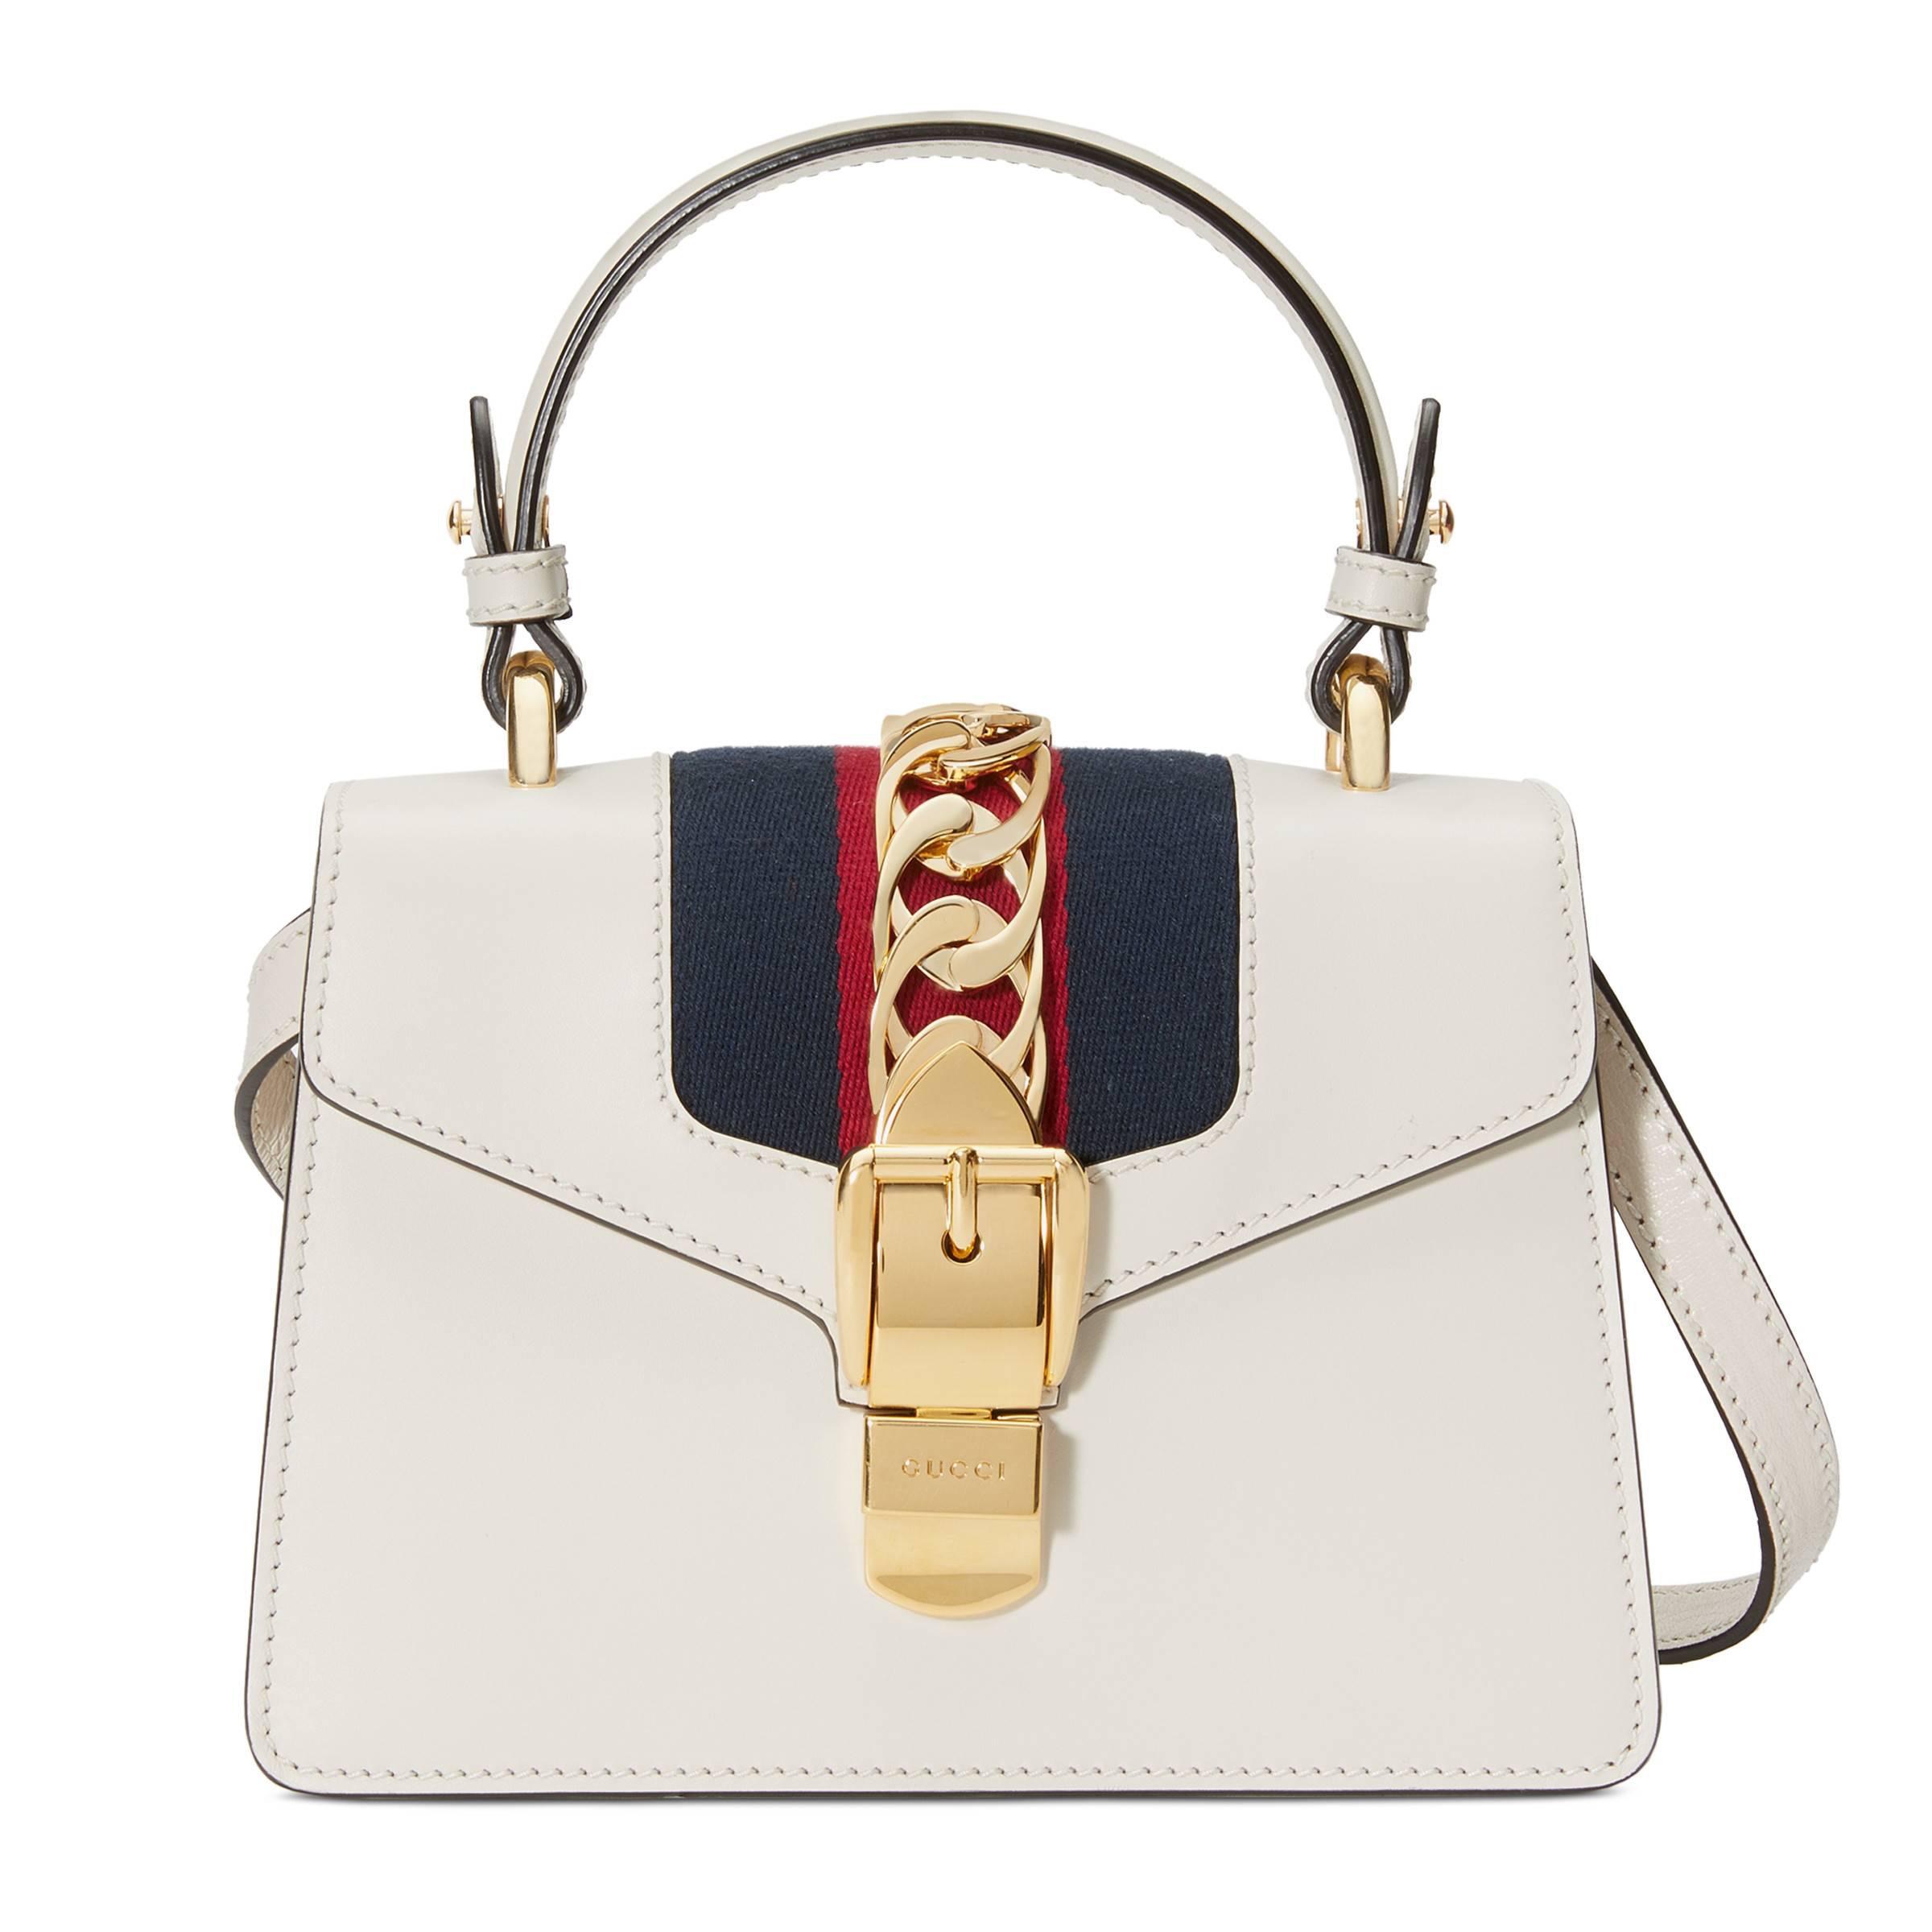 Gucci Sylvie Leather Mini Bag in White - Lyst